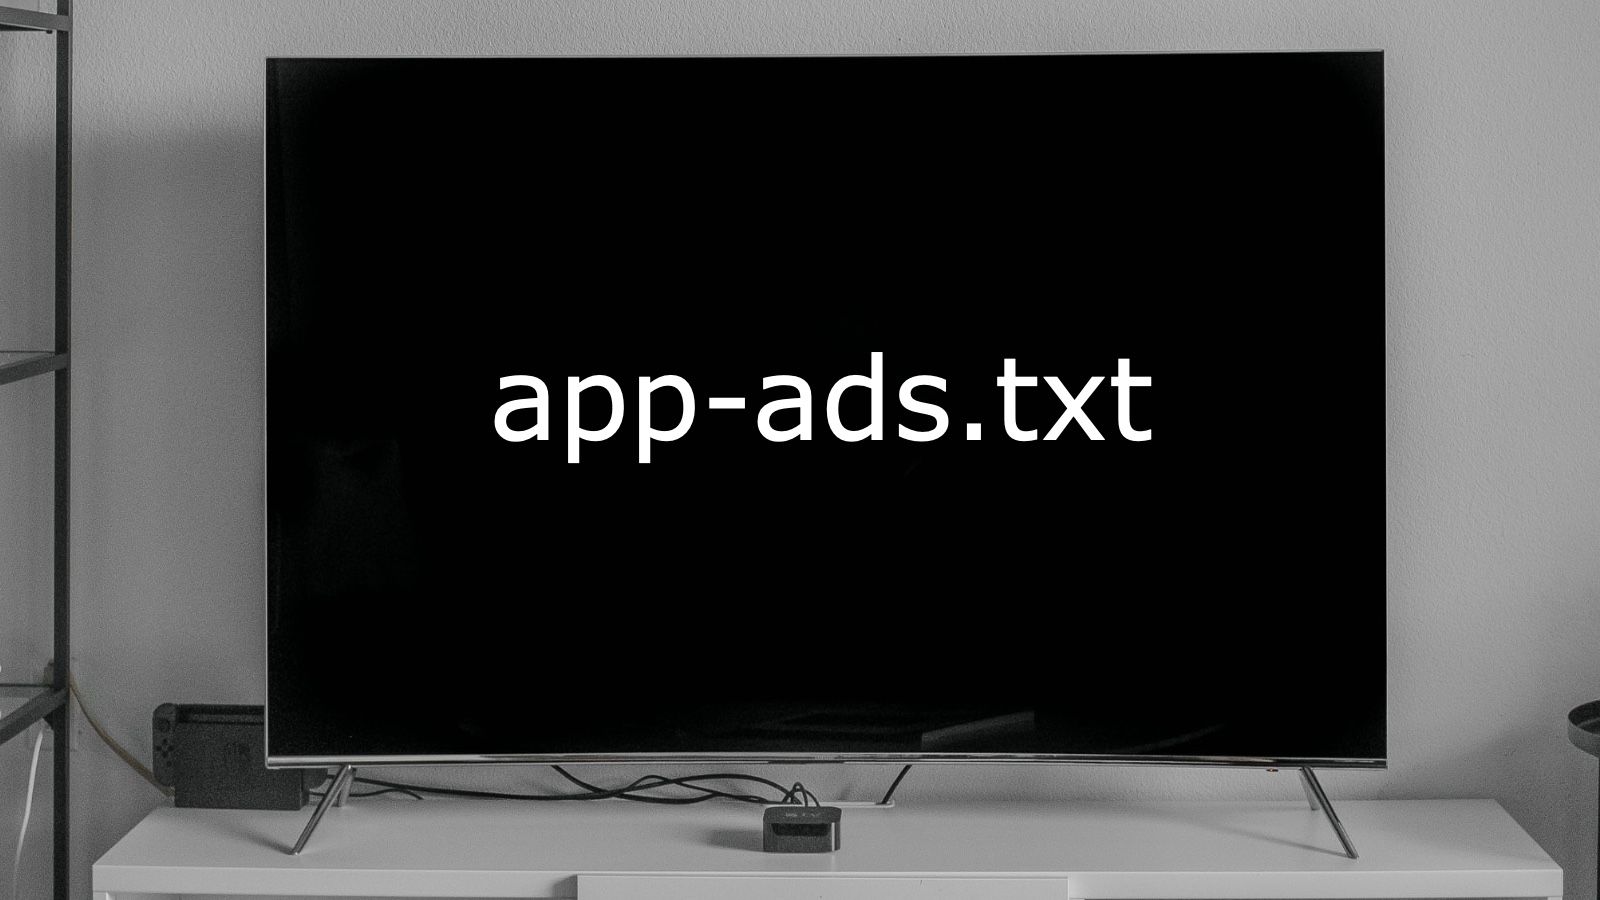 Google recommends publishers to adopt the new app-ads.txt for CTV inventory